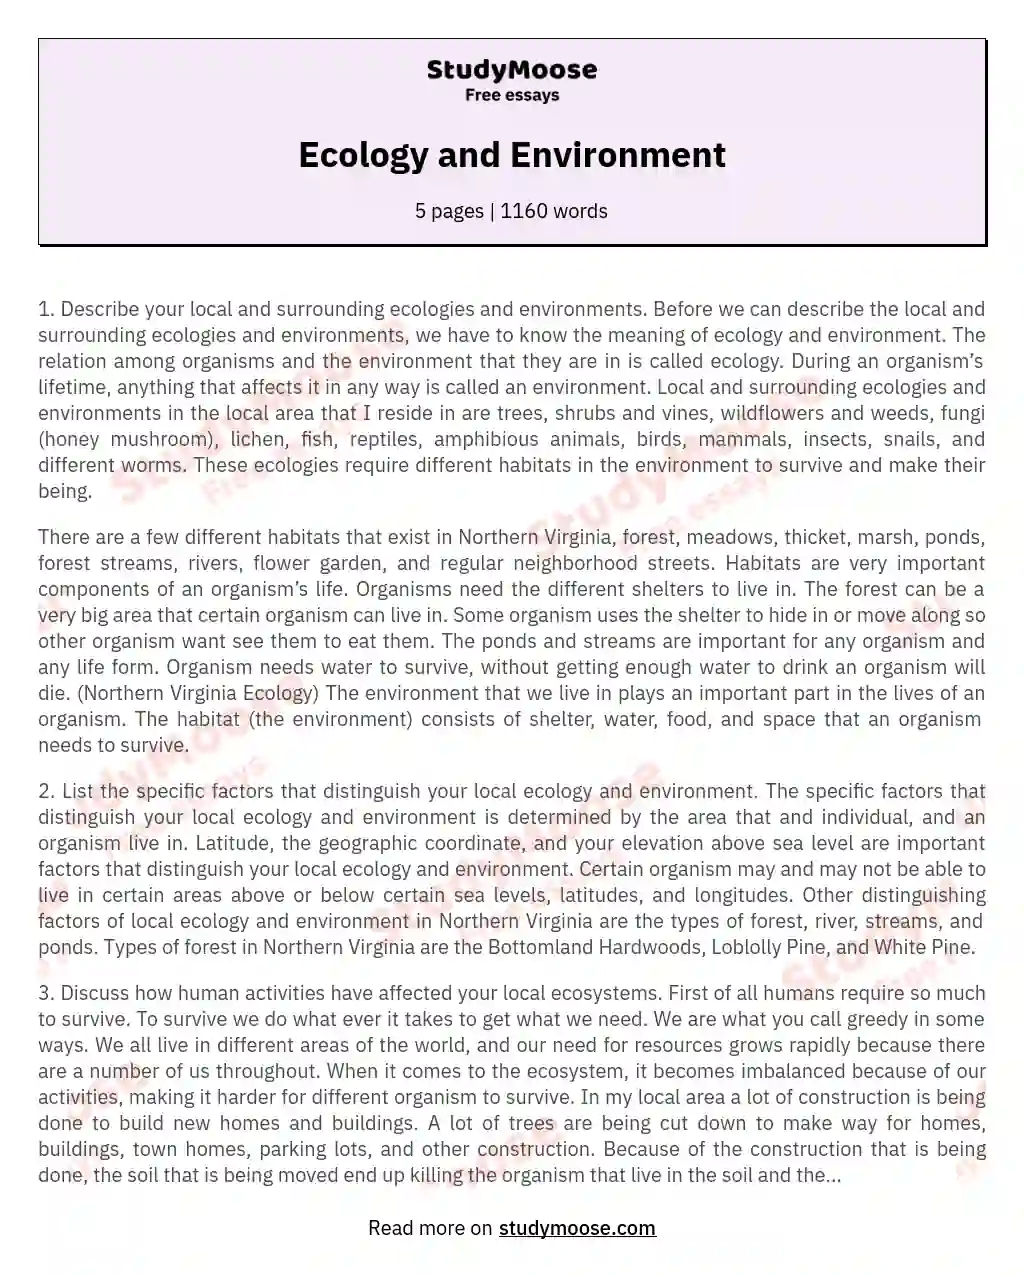 how humans affect the environment essay